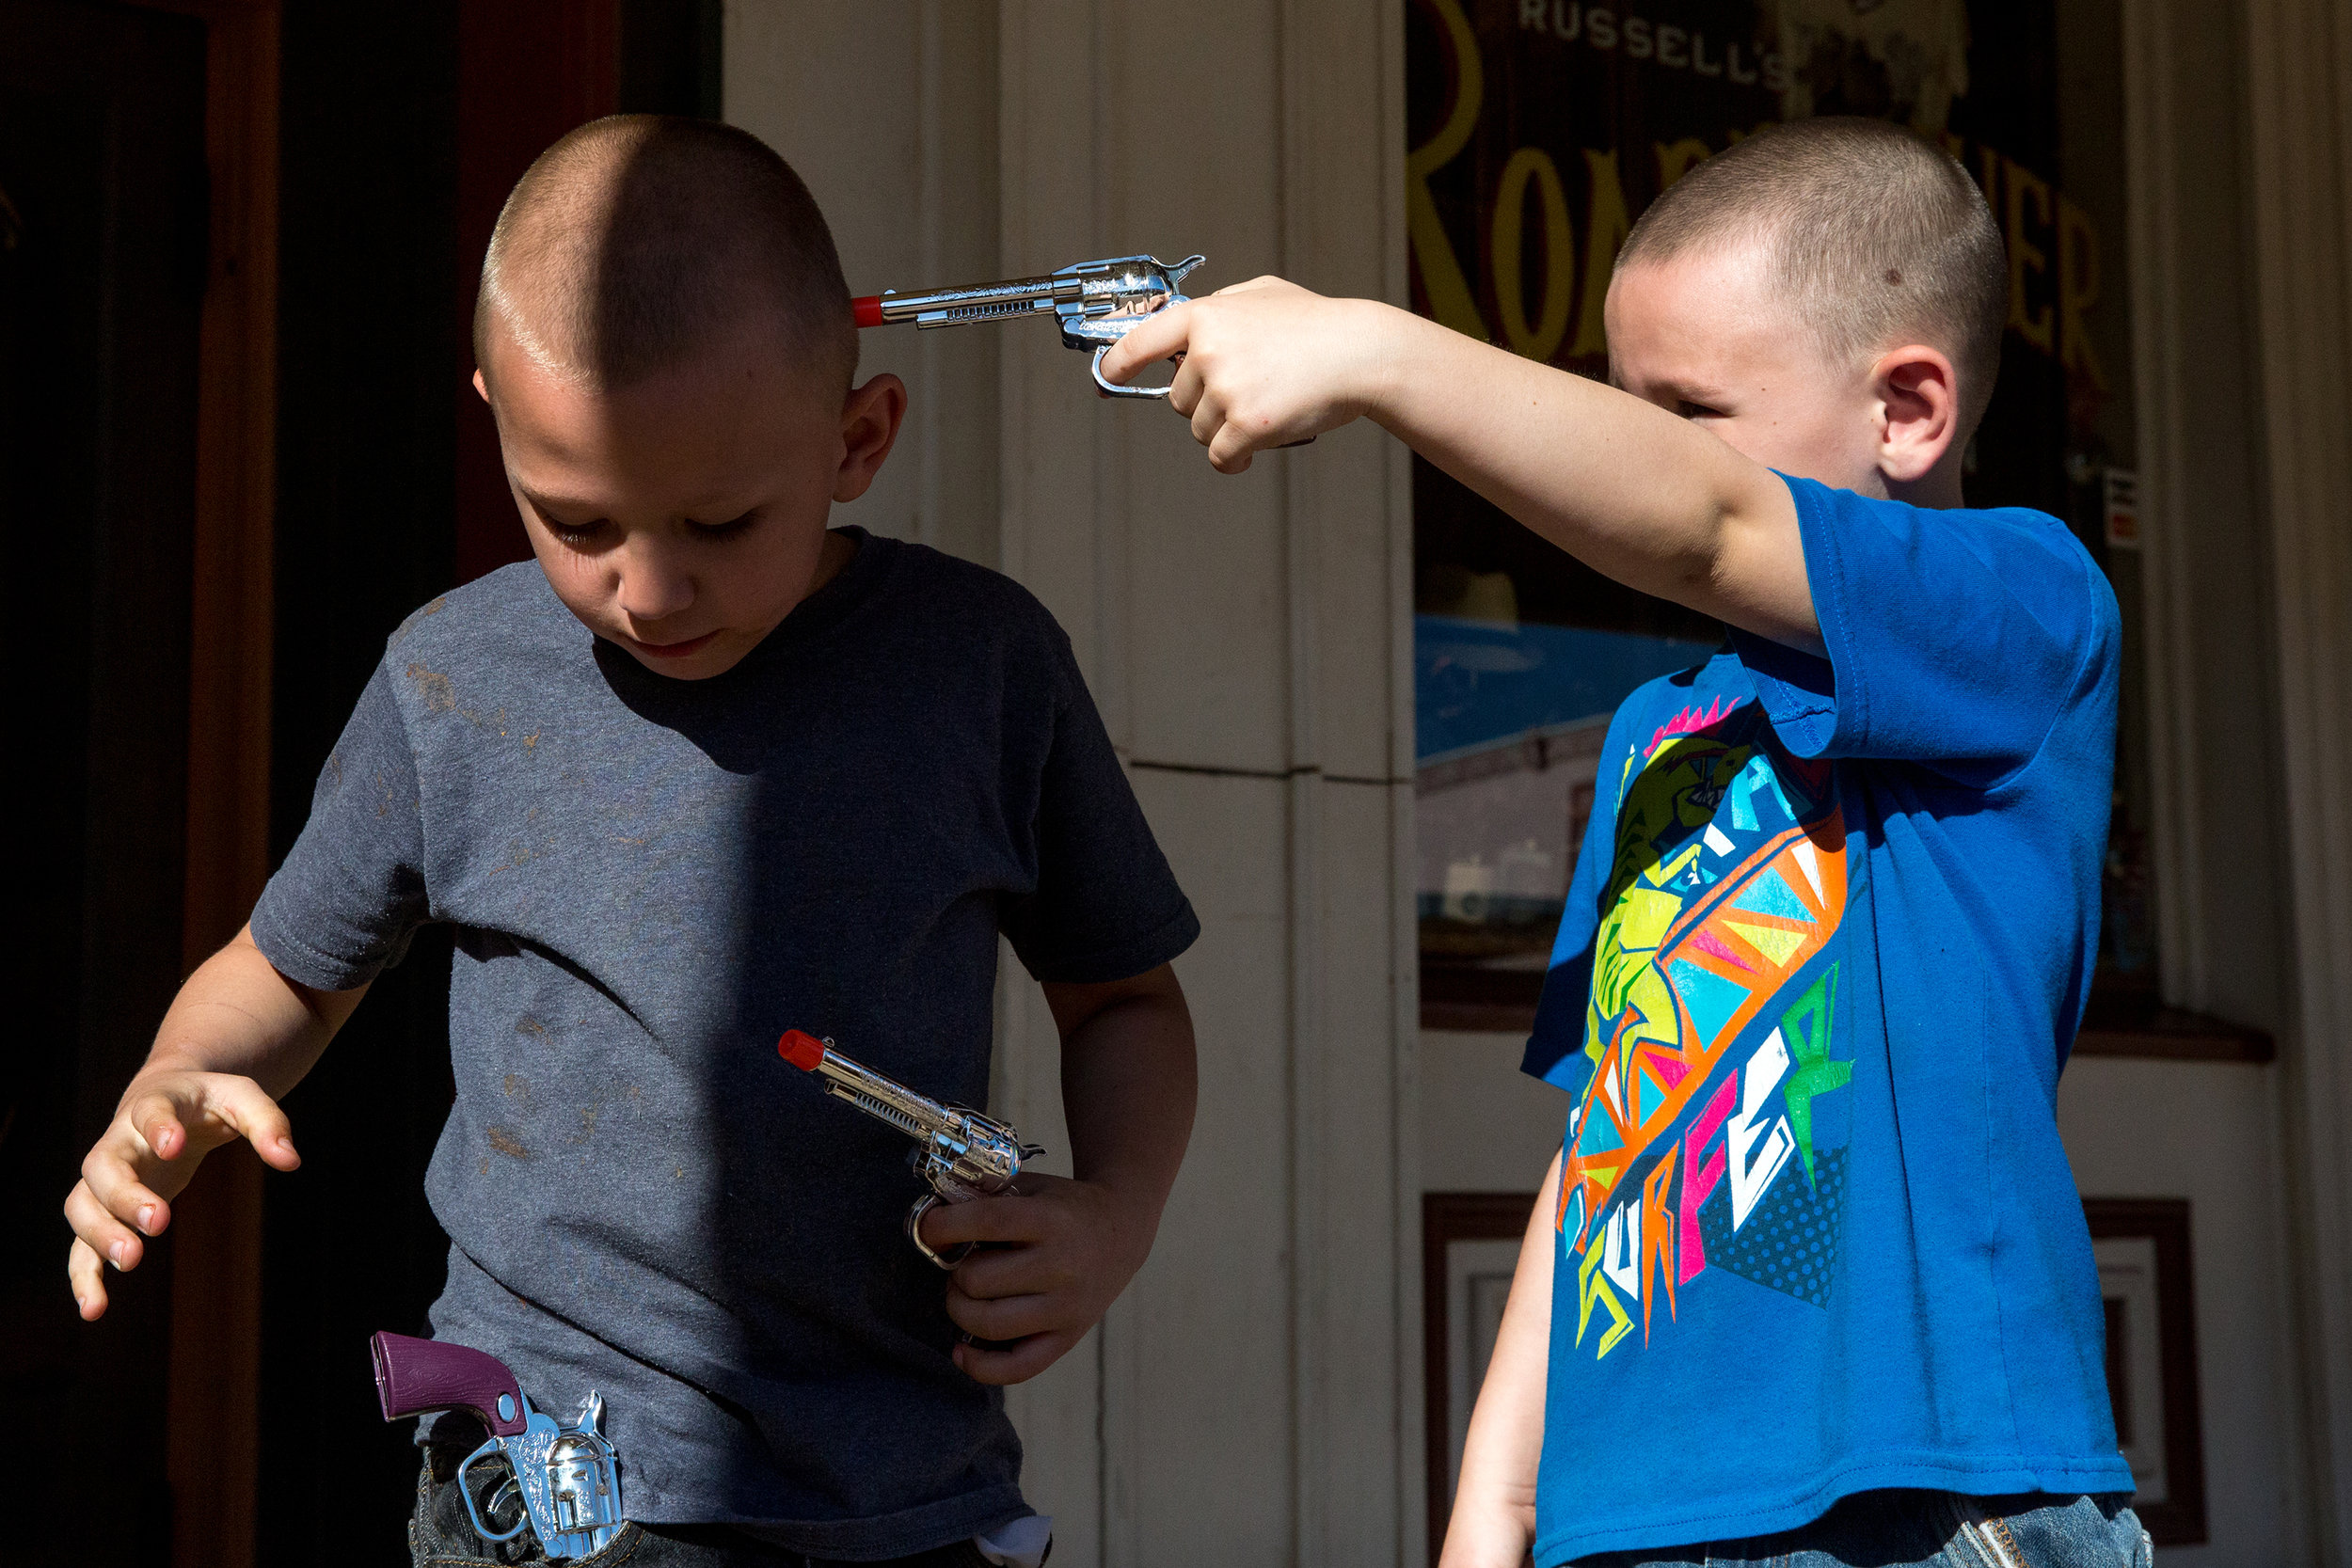  Blake Wooldrige (right) points a toy gun at his younger brother, Nicholas Wooldrige, after his mother told him not to, on Allen Street in Tombstone, Ariz., on April 9, 2016.  